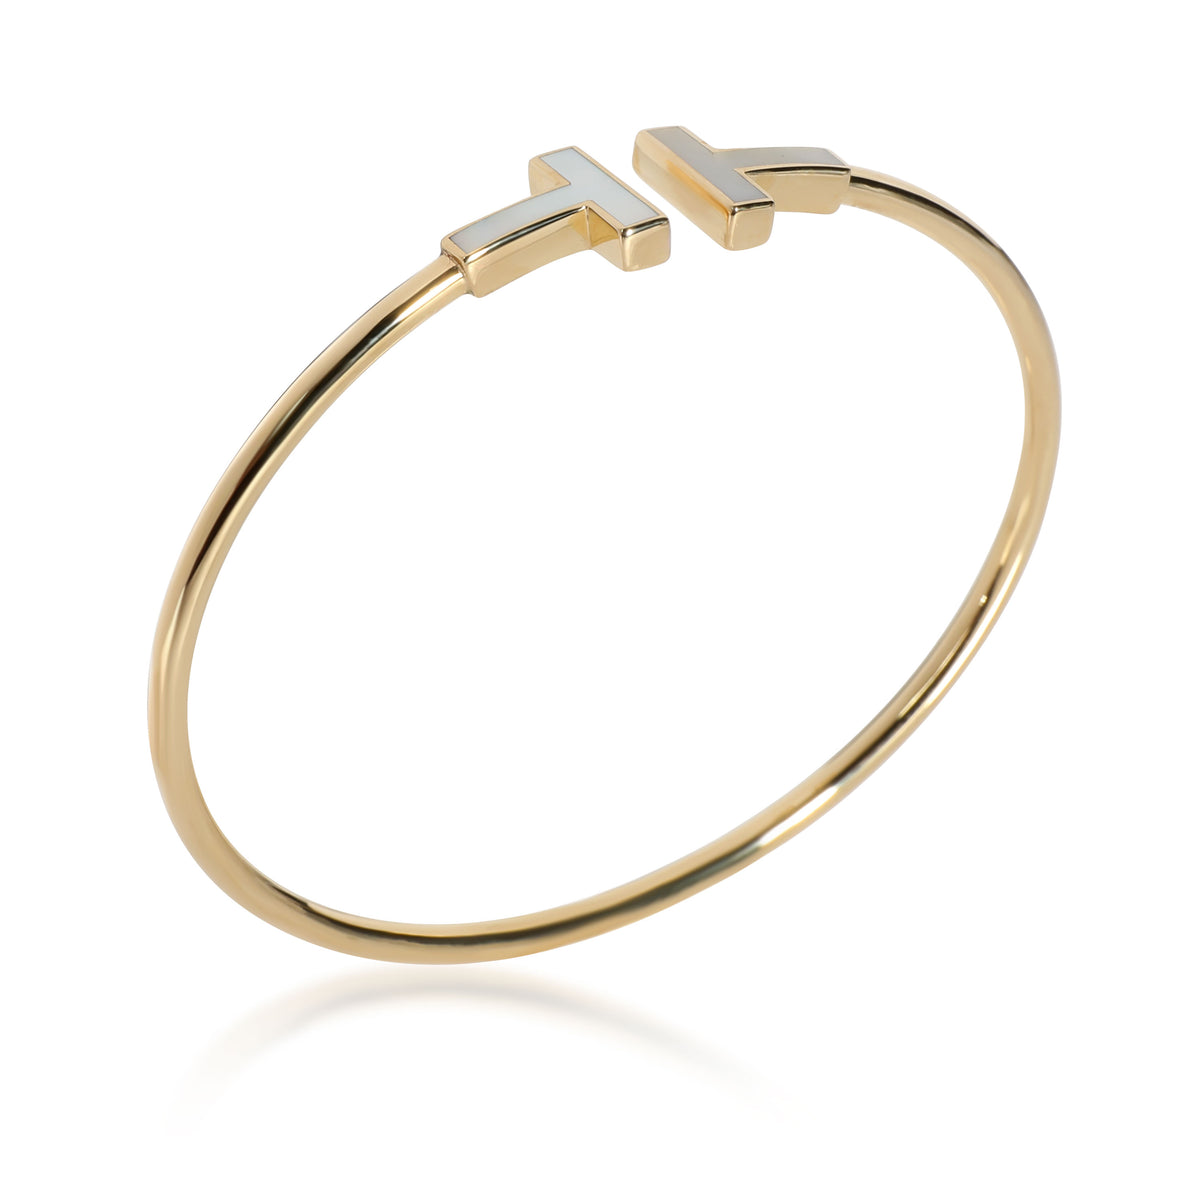 Tiffany & Co. T Mother Of Pearl Bangle in 18K Yellow Gold